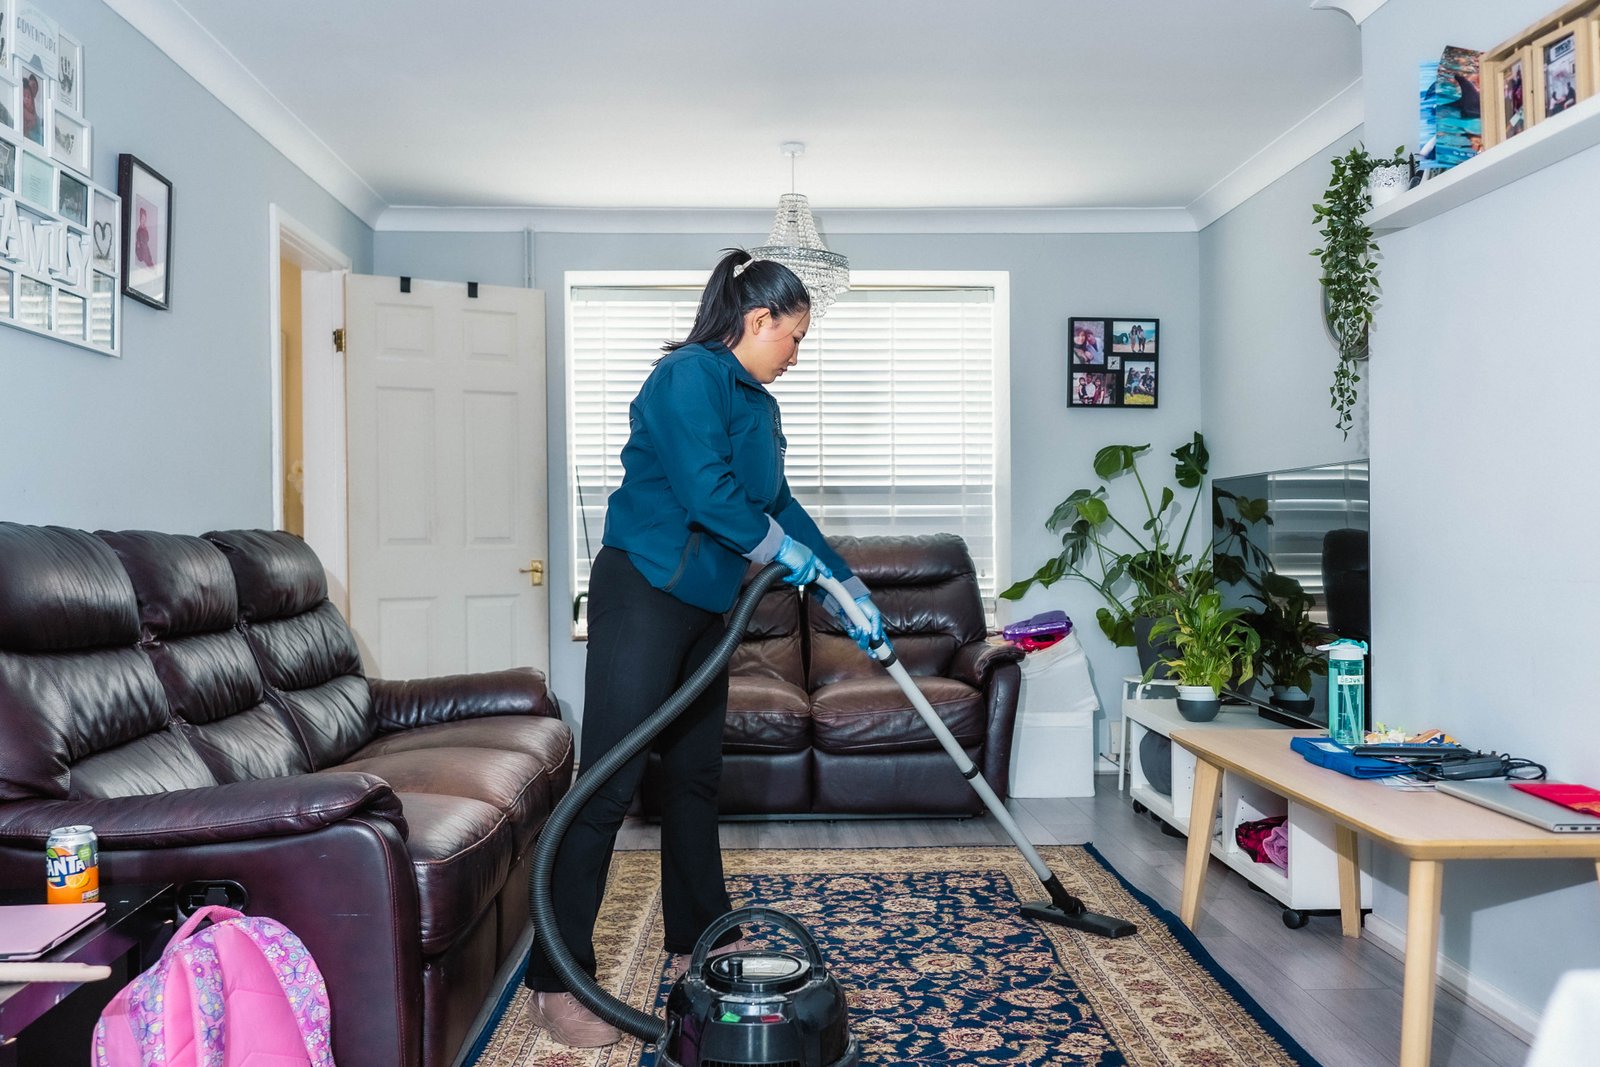 Domestic Cleaning Services